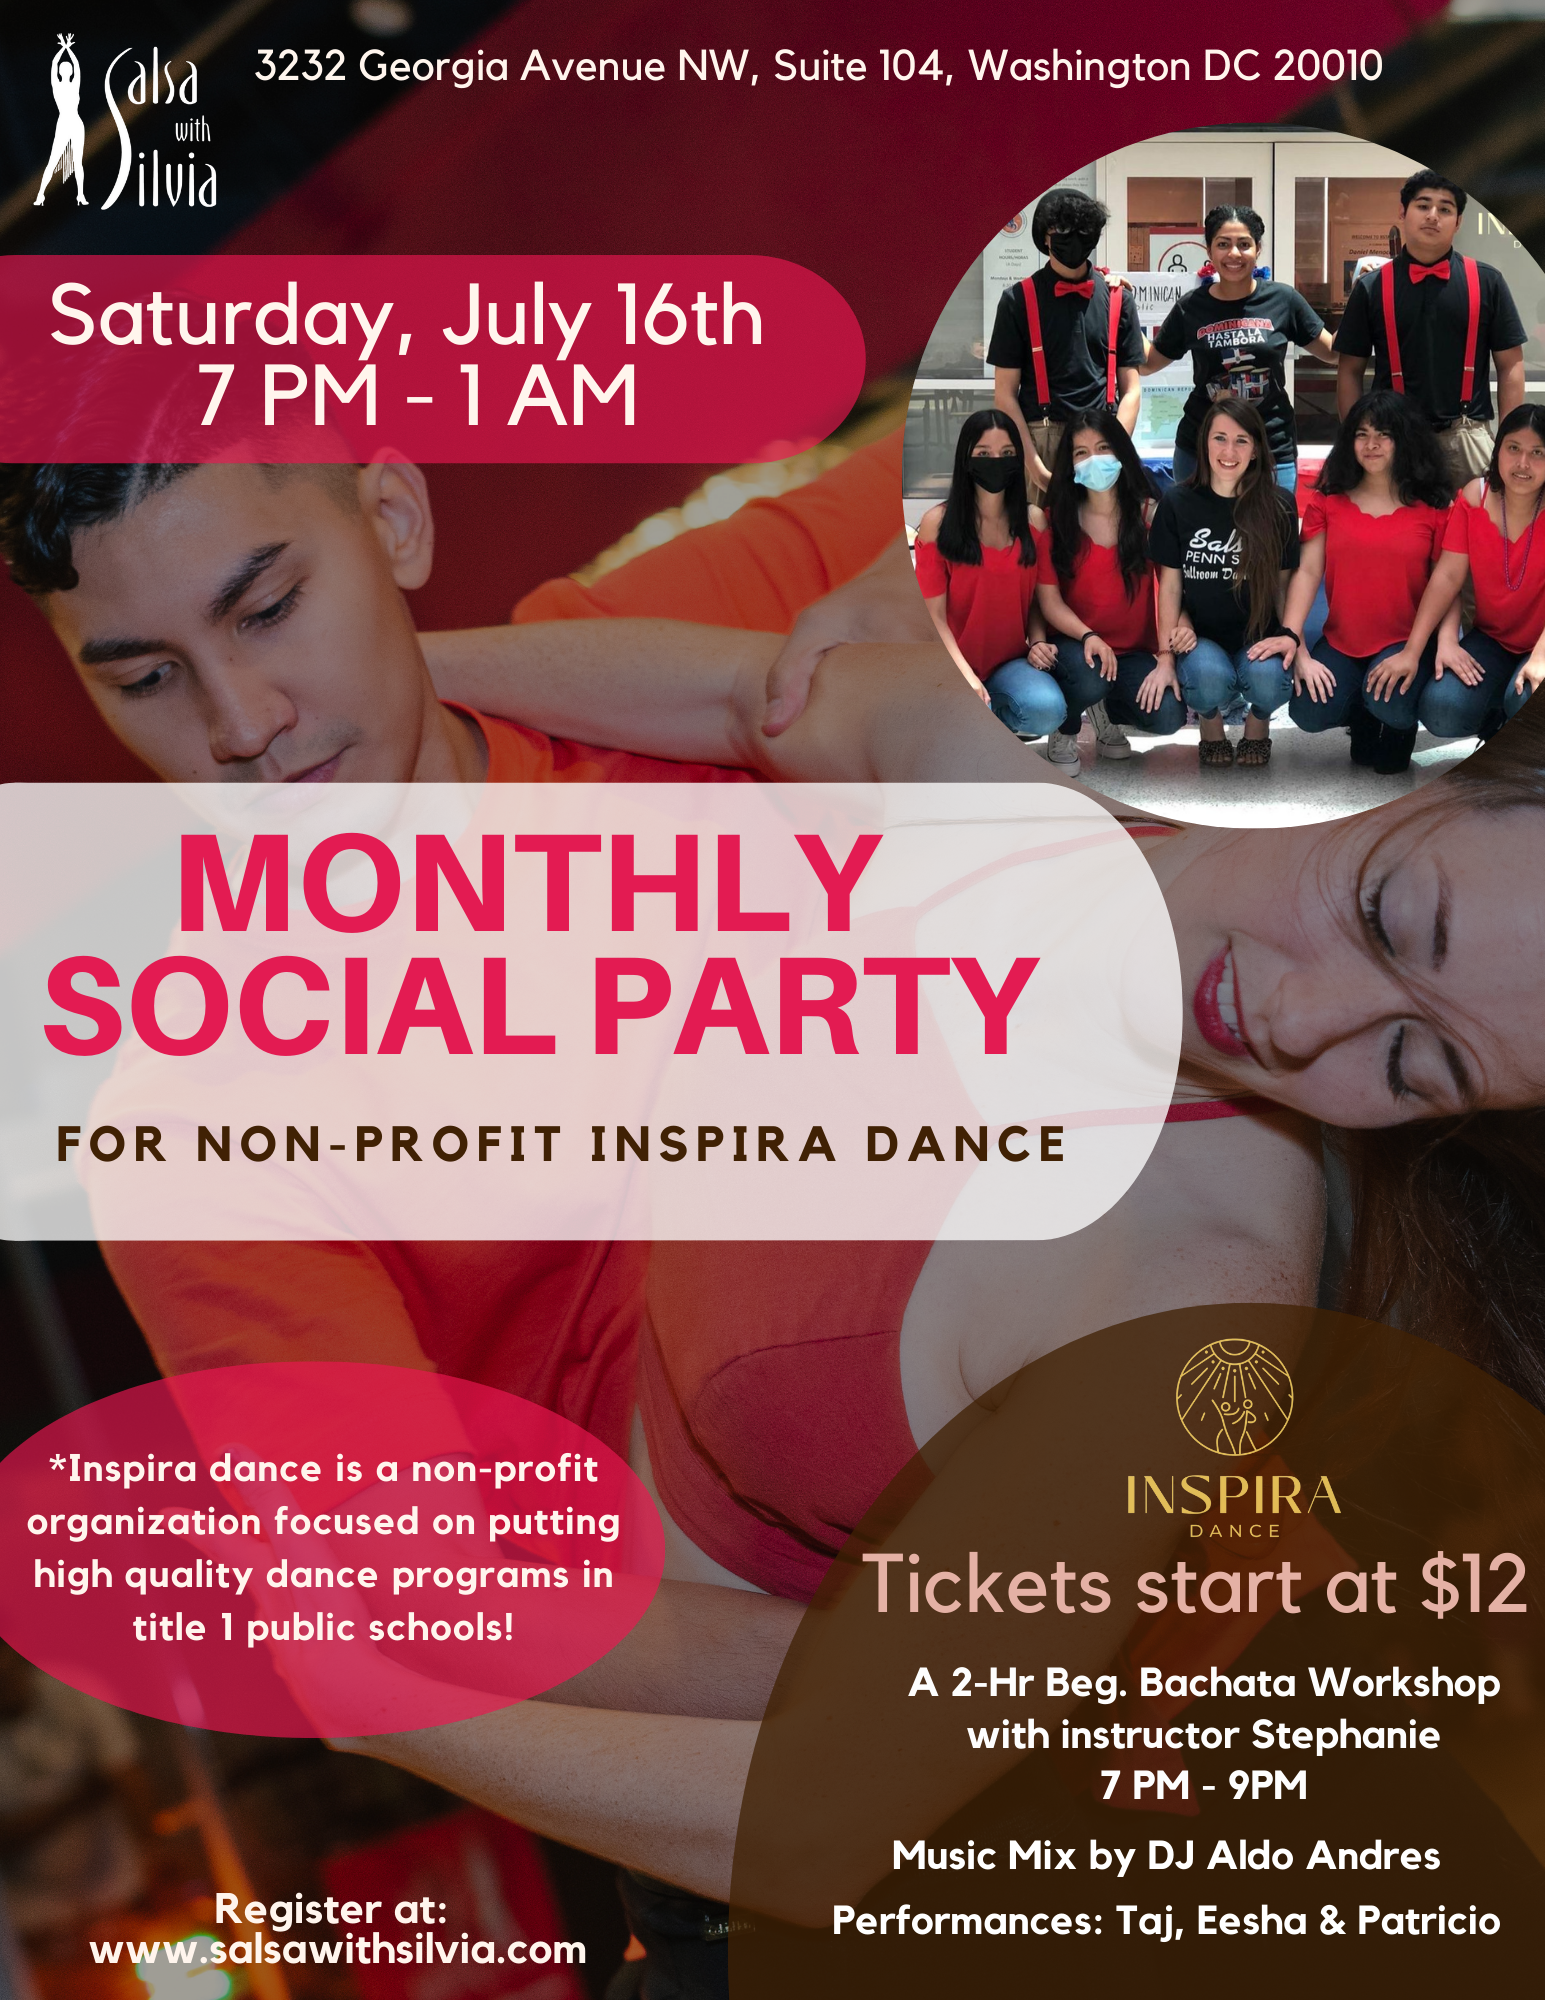 Fundraiser for Inspira Dance Monthly Social Dance Party + Beg. Bachata Workshop with Stephanie